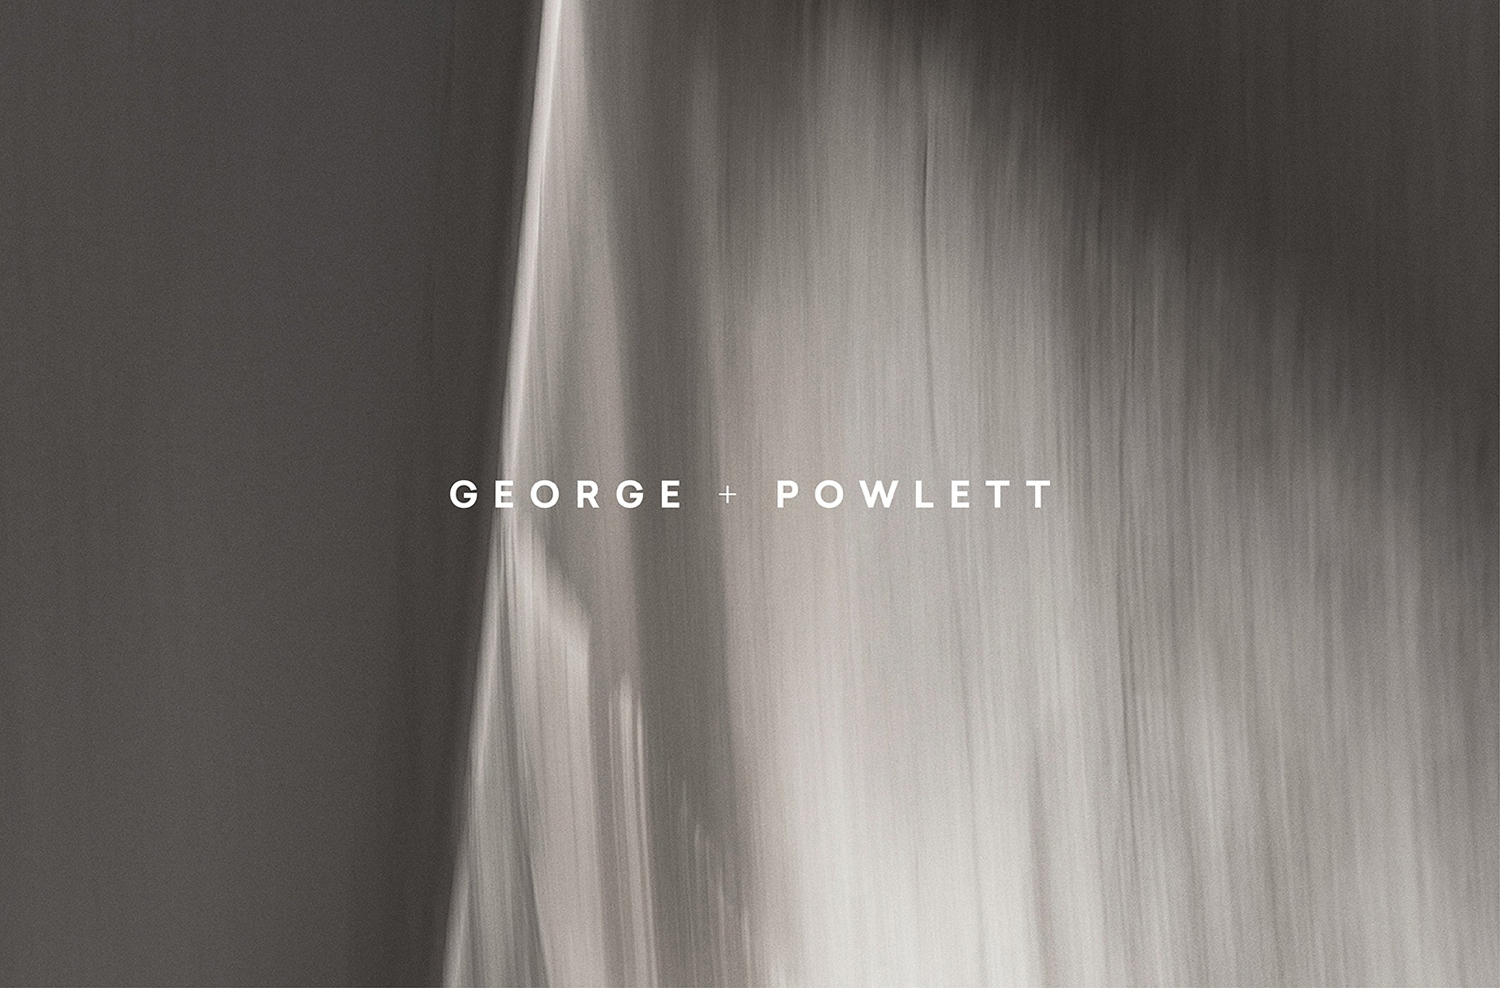 Brand identity and logotype by Studio Brave for East Melbourne residential property development George + Powlett